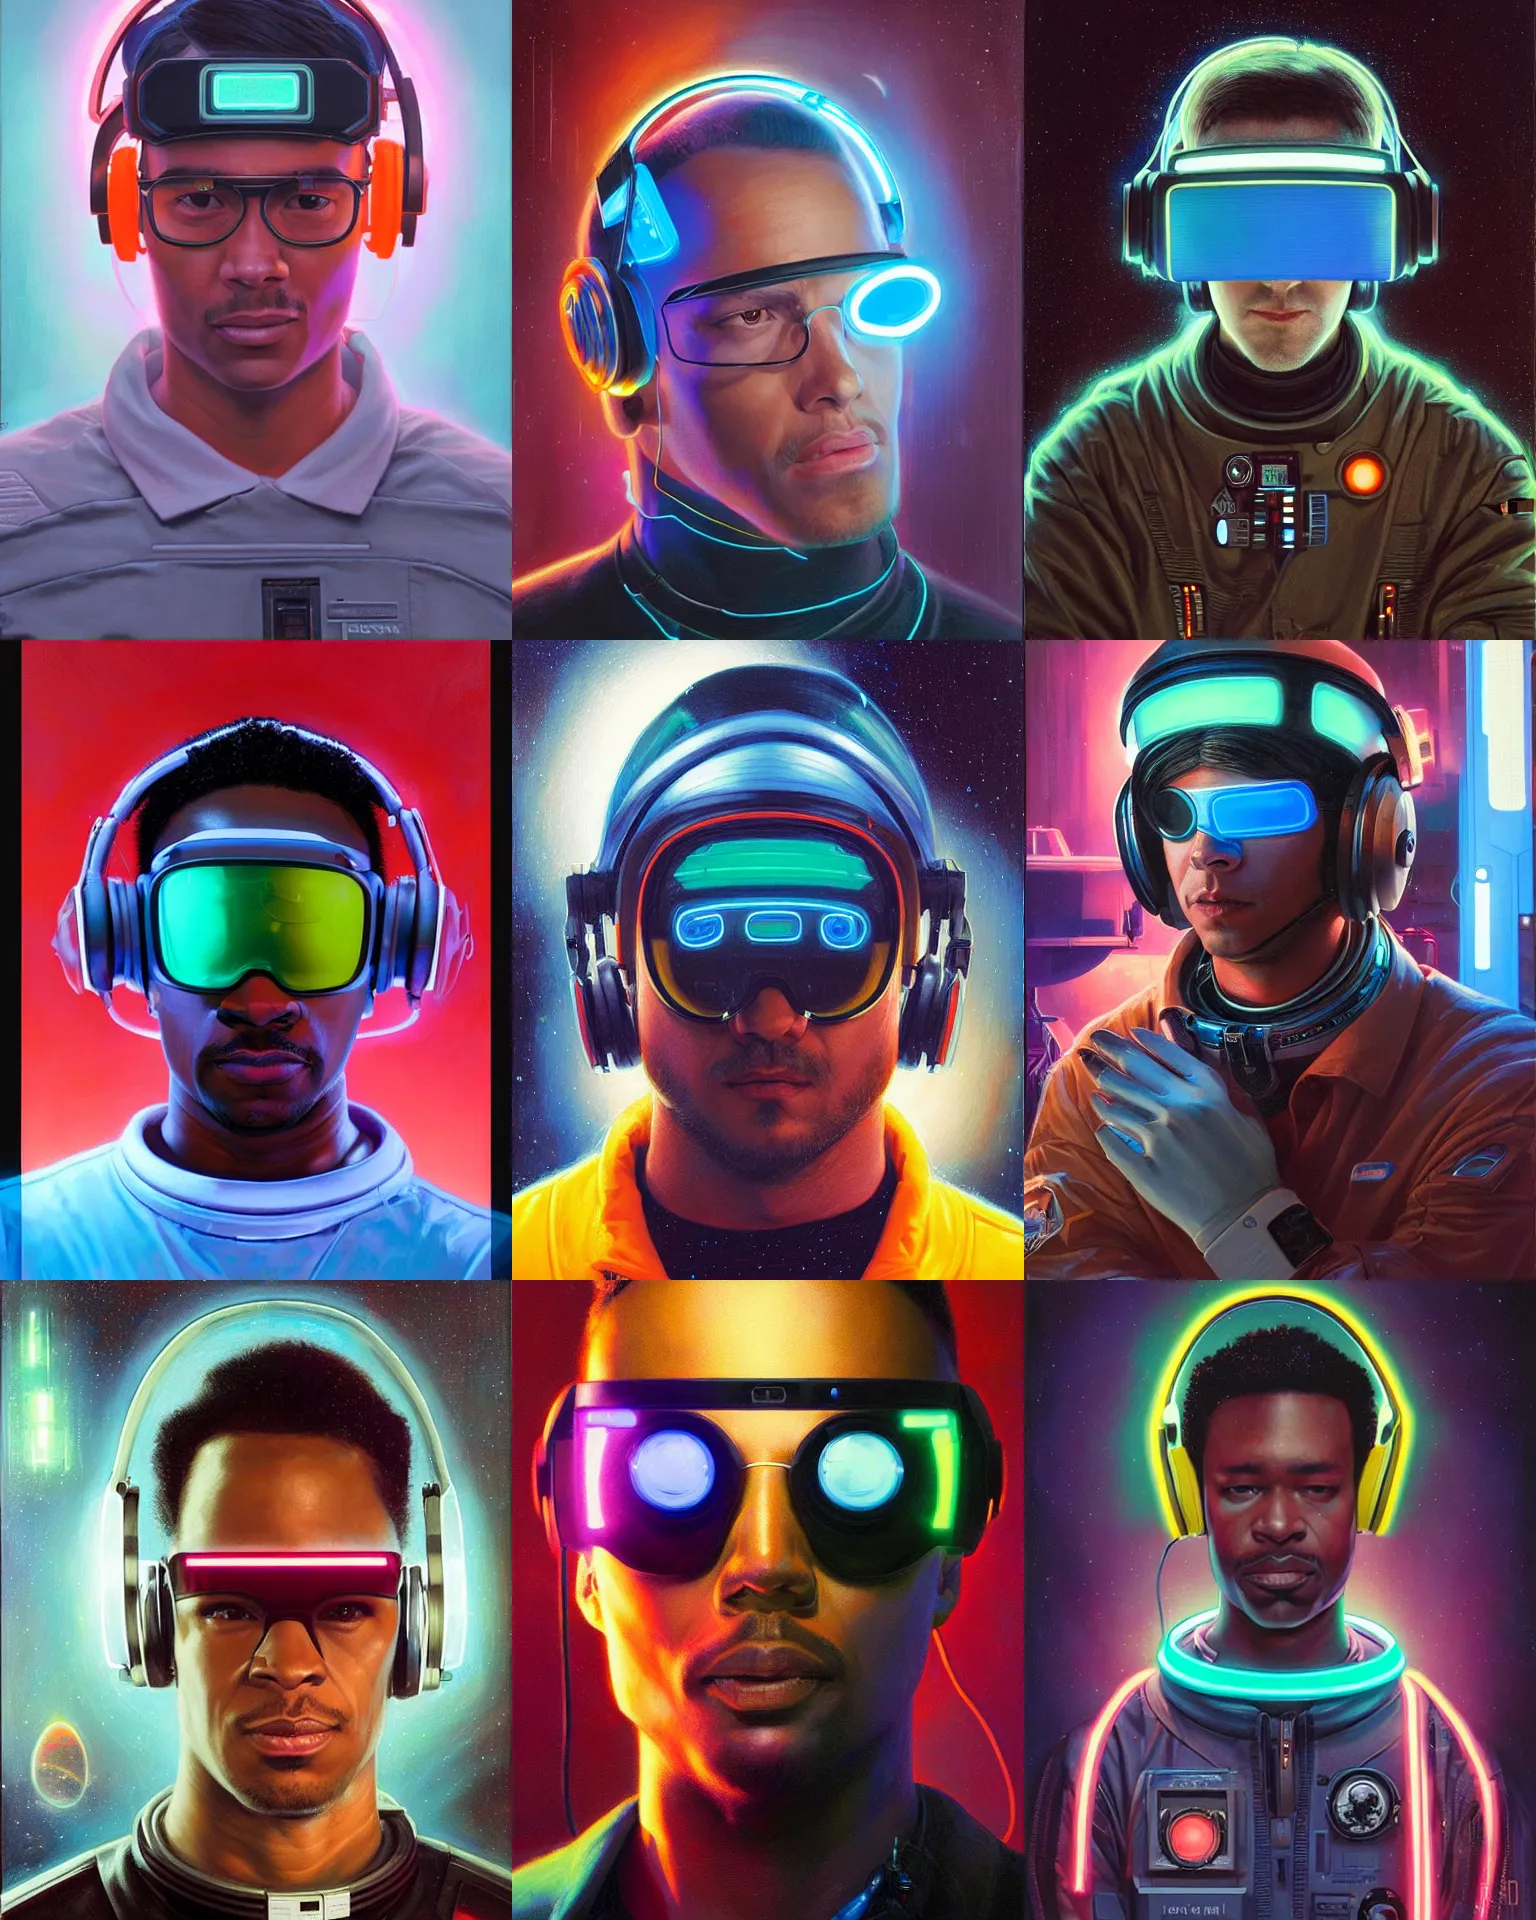 Prompt: bryan neon cyberpunk programmer with glowing geordi visor over eyes and sleek headphones headshot desaturated portrait painting by donato giancola, dean cornwall, rhads, tom whalen, conrad roset astronaut fashion photography